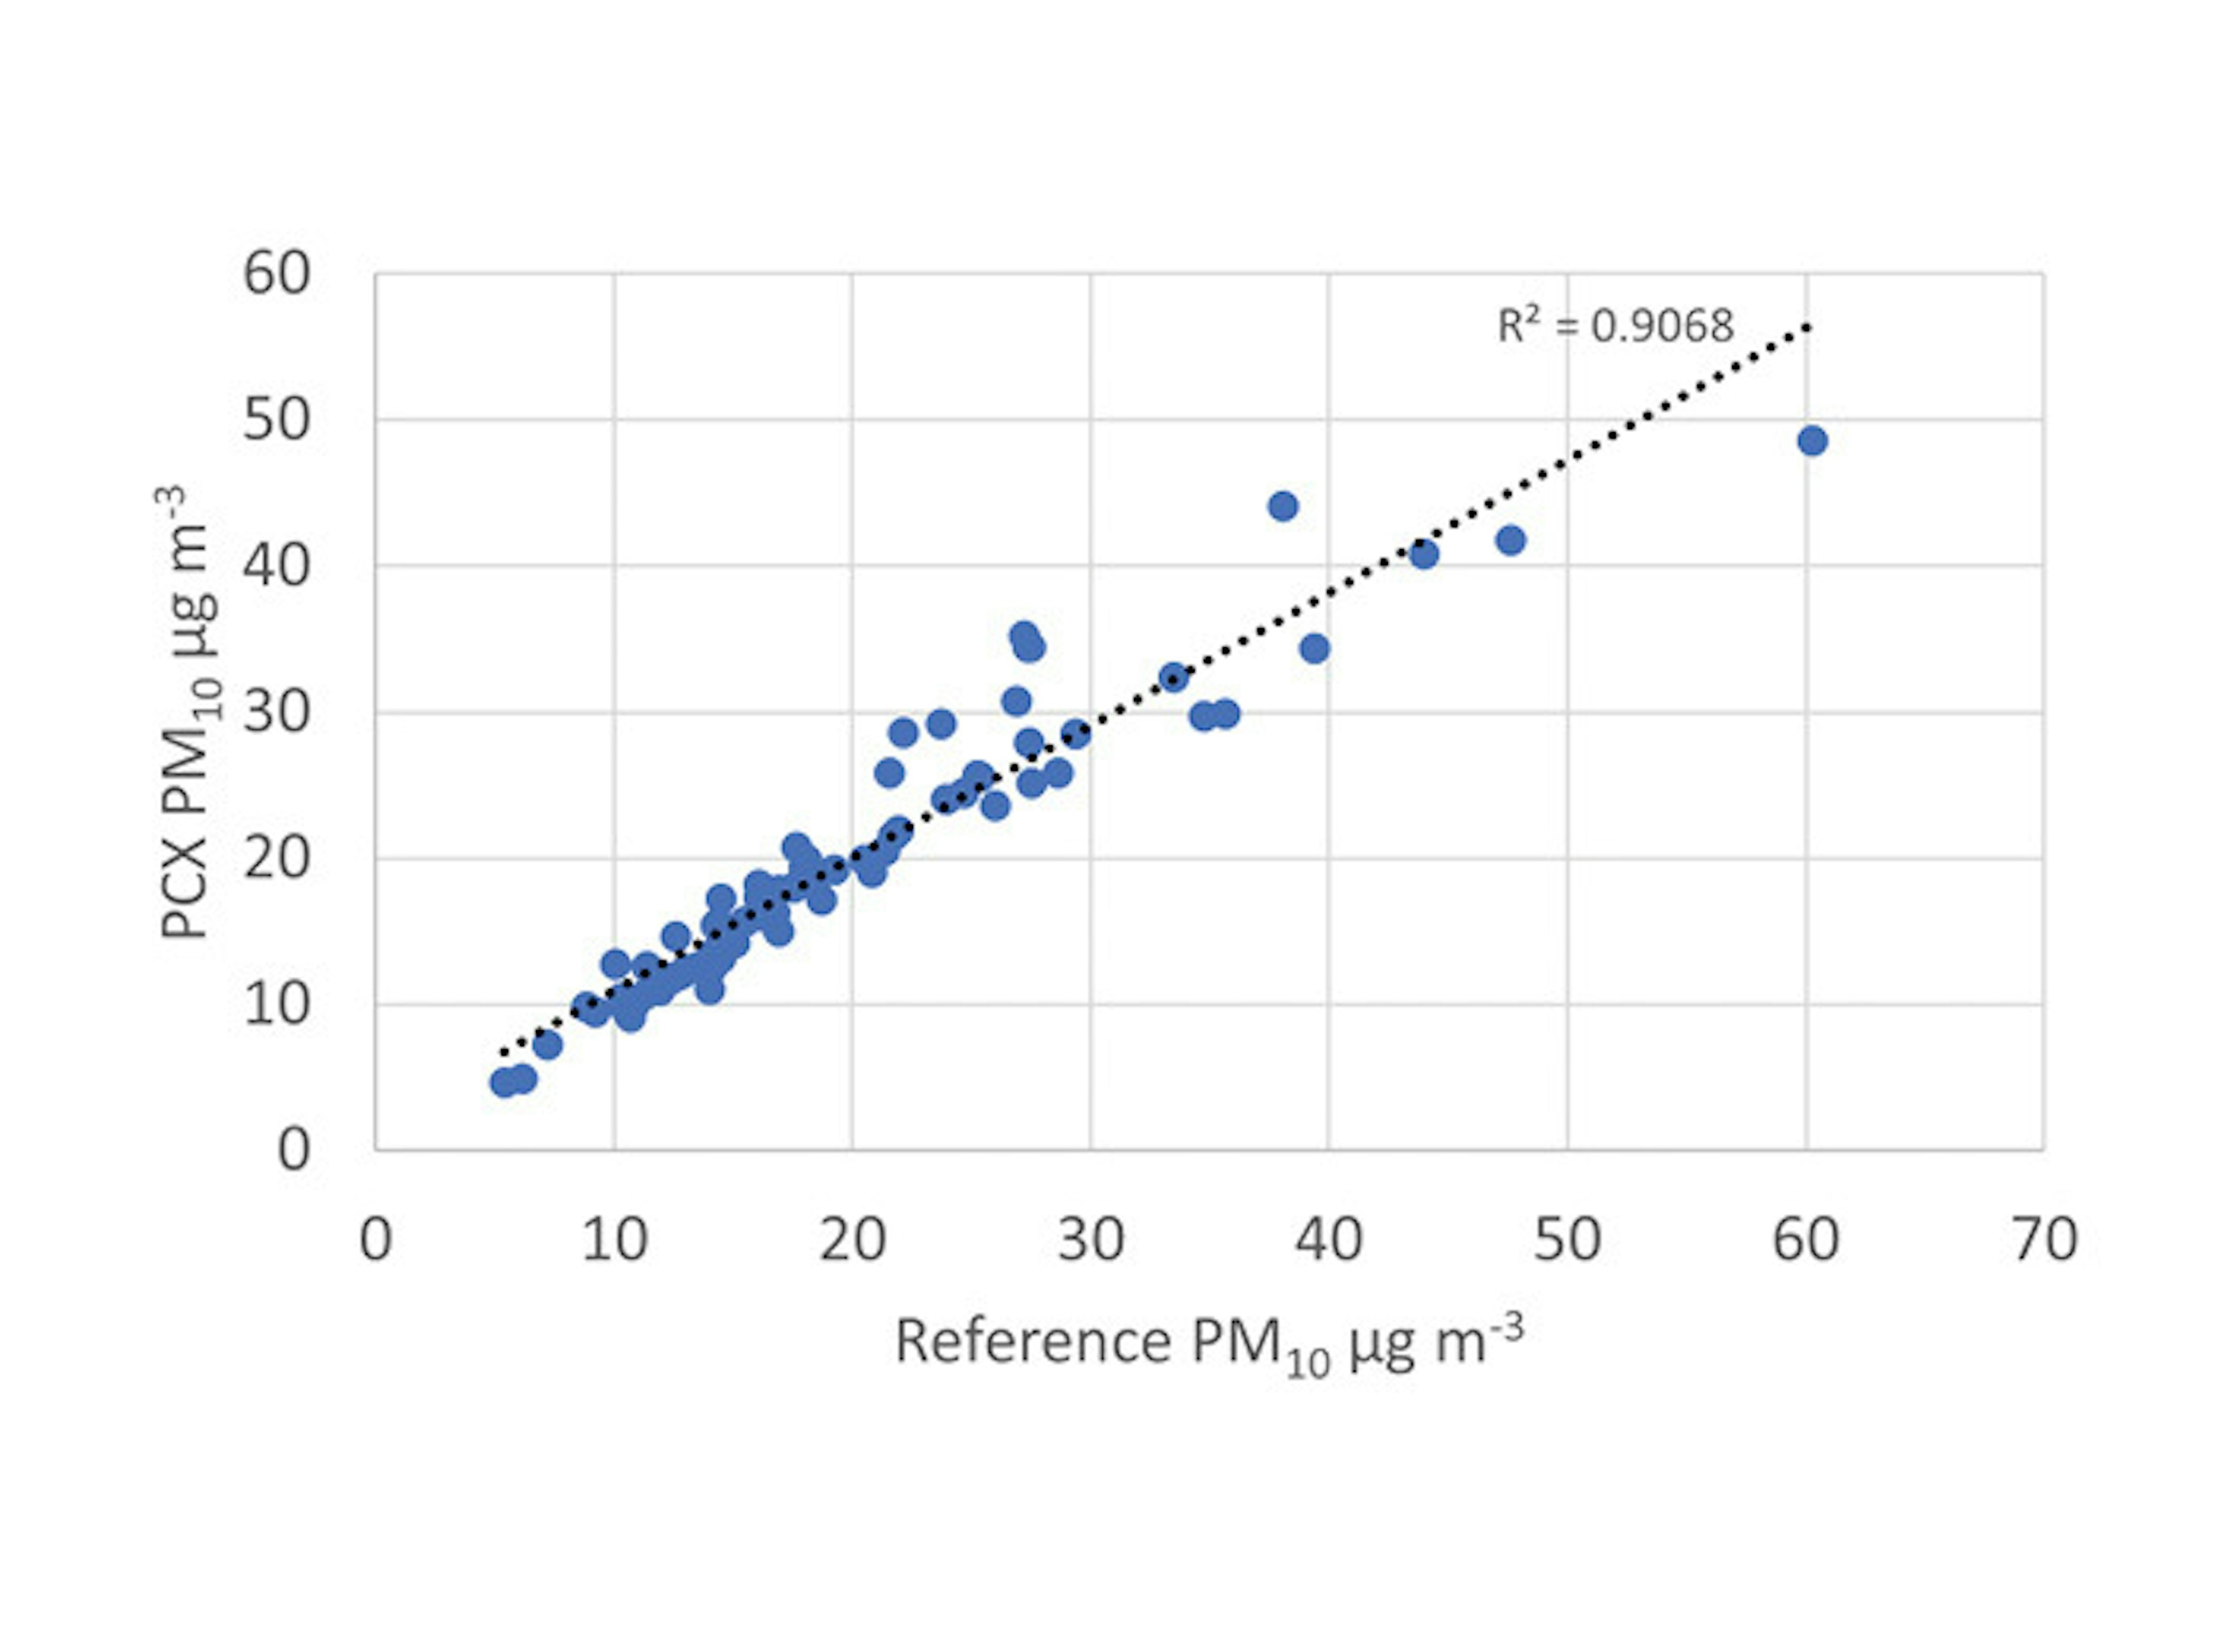 PCX module scatter plot of data with linear regression and coefficient of determination PM10